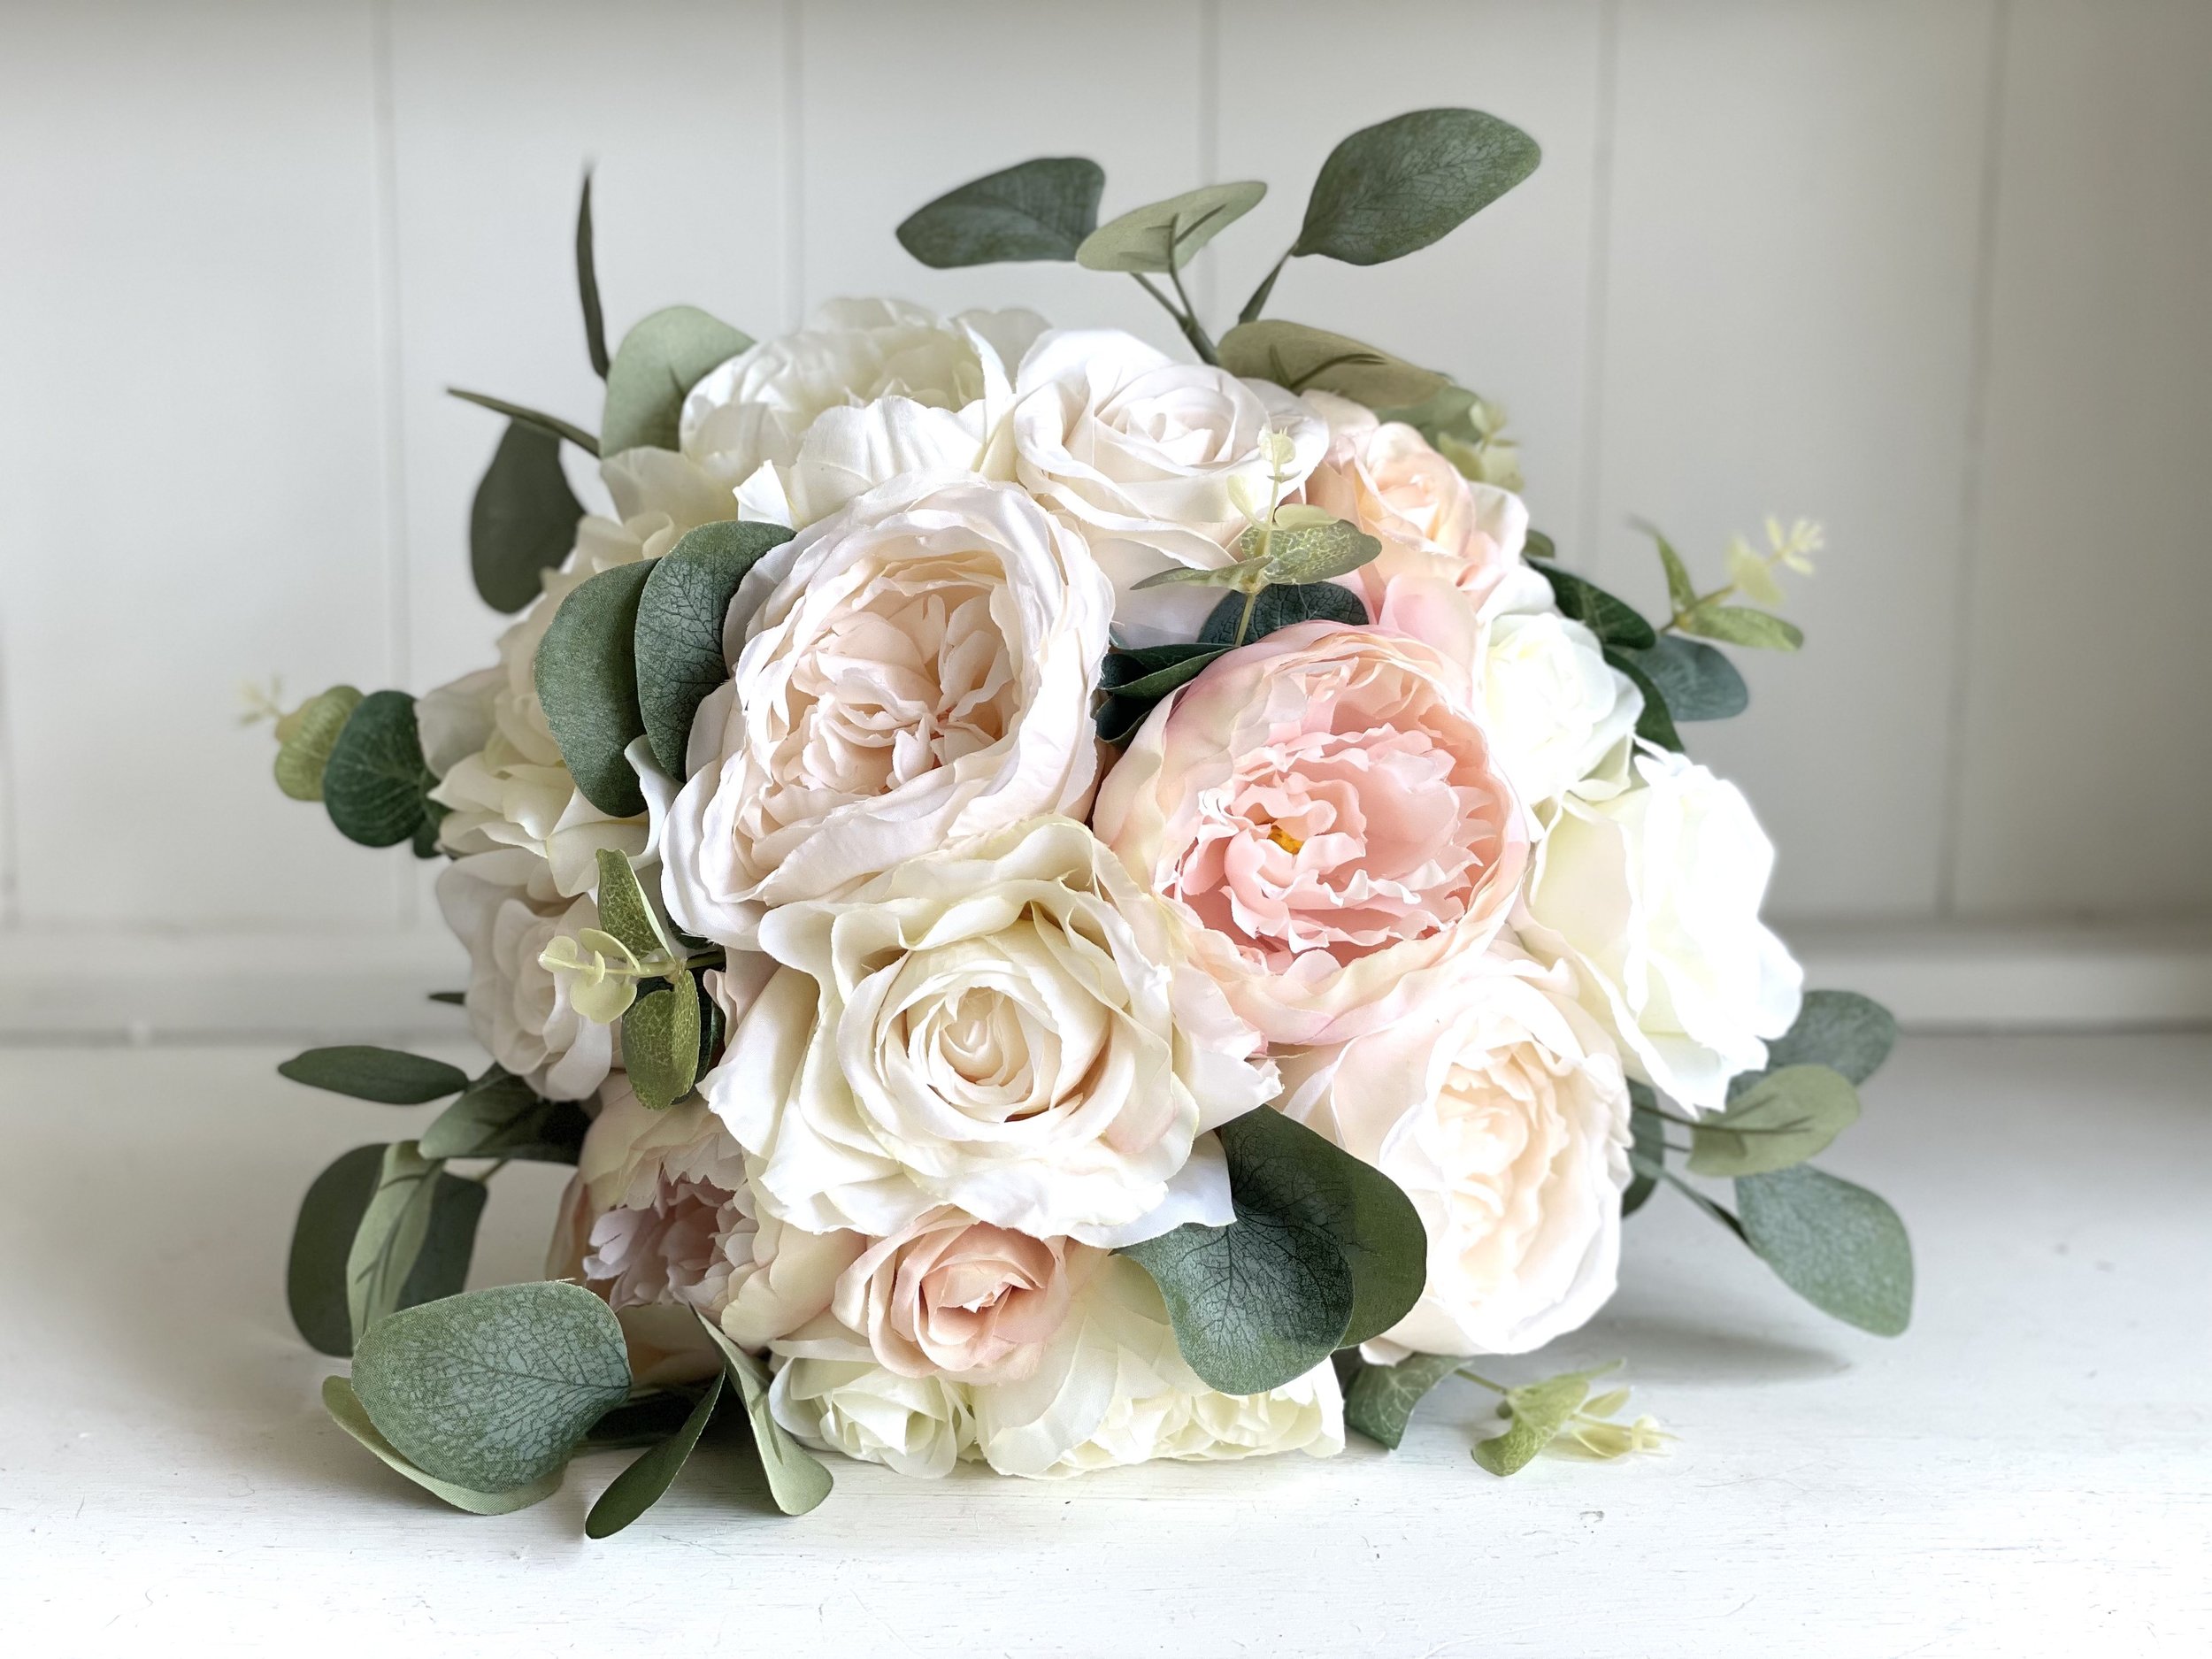 Seasonal Selections: Choosing the Perfect Wedding Flowers for Your Special Day